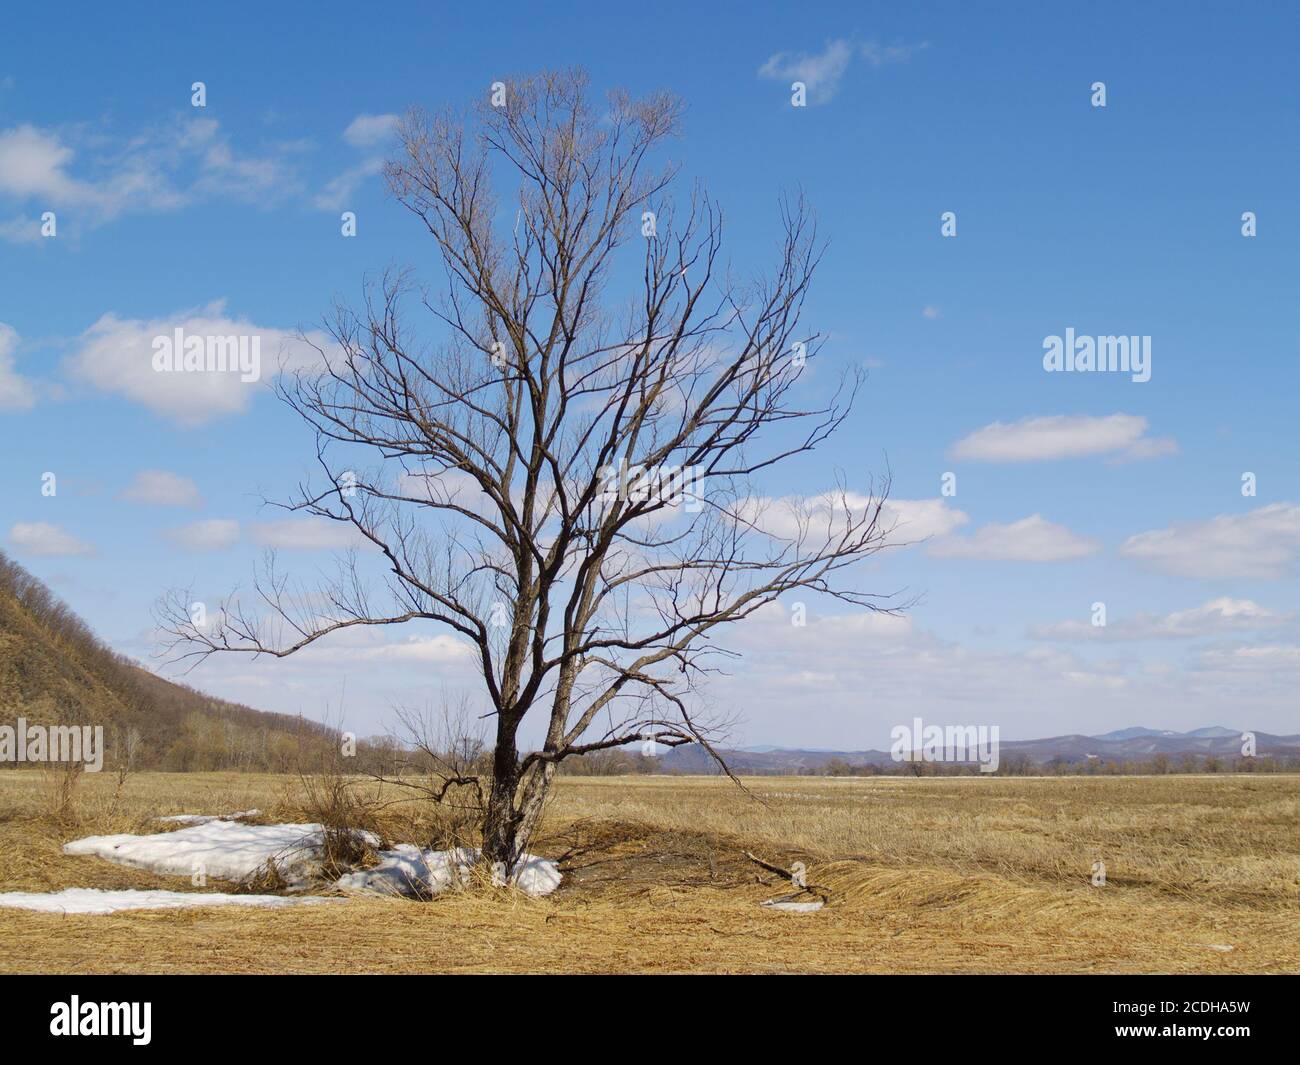 Lonely tree in the middle of a field Stock Photo